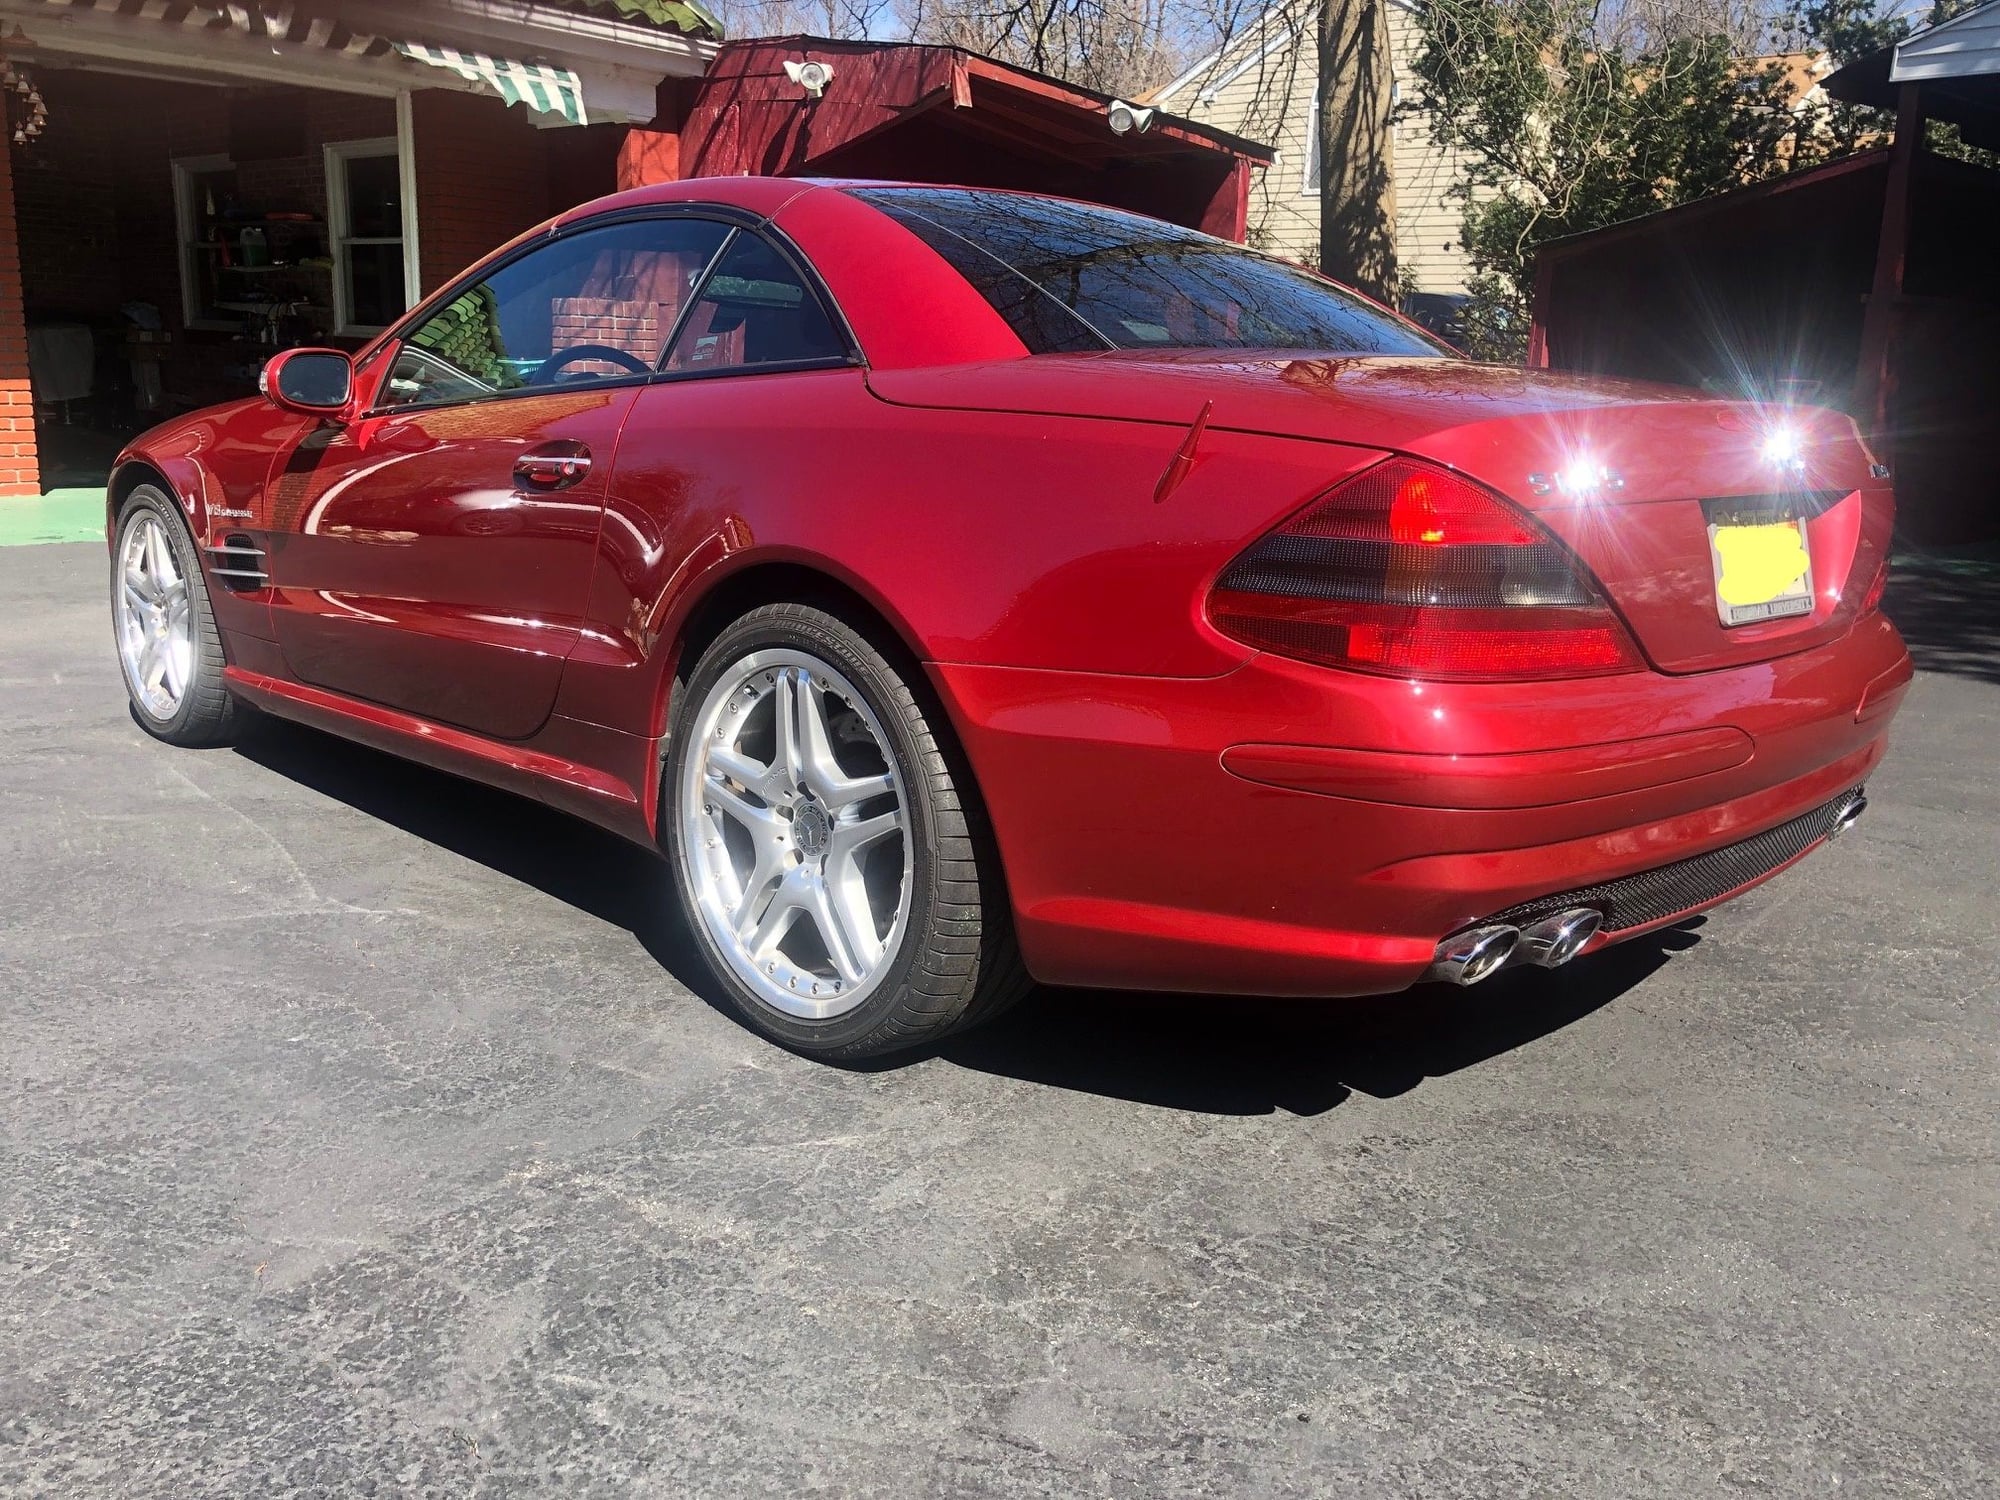 2003 Mercedes-Benz SL55 AMG - FS:  2003 SL55 Firemist Red/Black Single owner, clean car fax - Used - VIN WDBSK74F23F032815 - 37,300 Miles - 8 cyl - 2WD - Automatic - Convertible - Red - Montvale, NJ 07645, United States